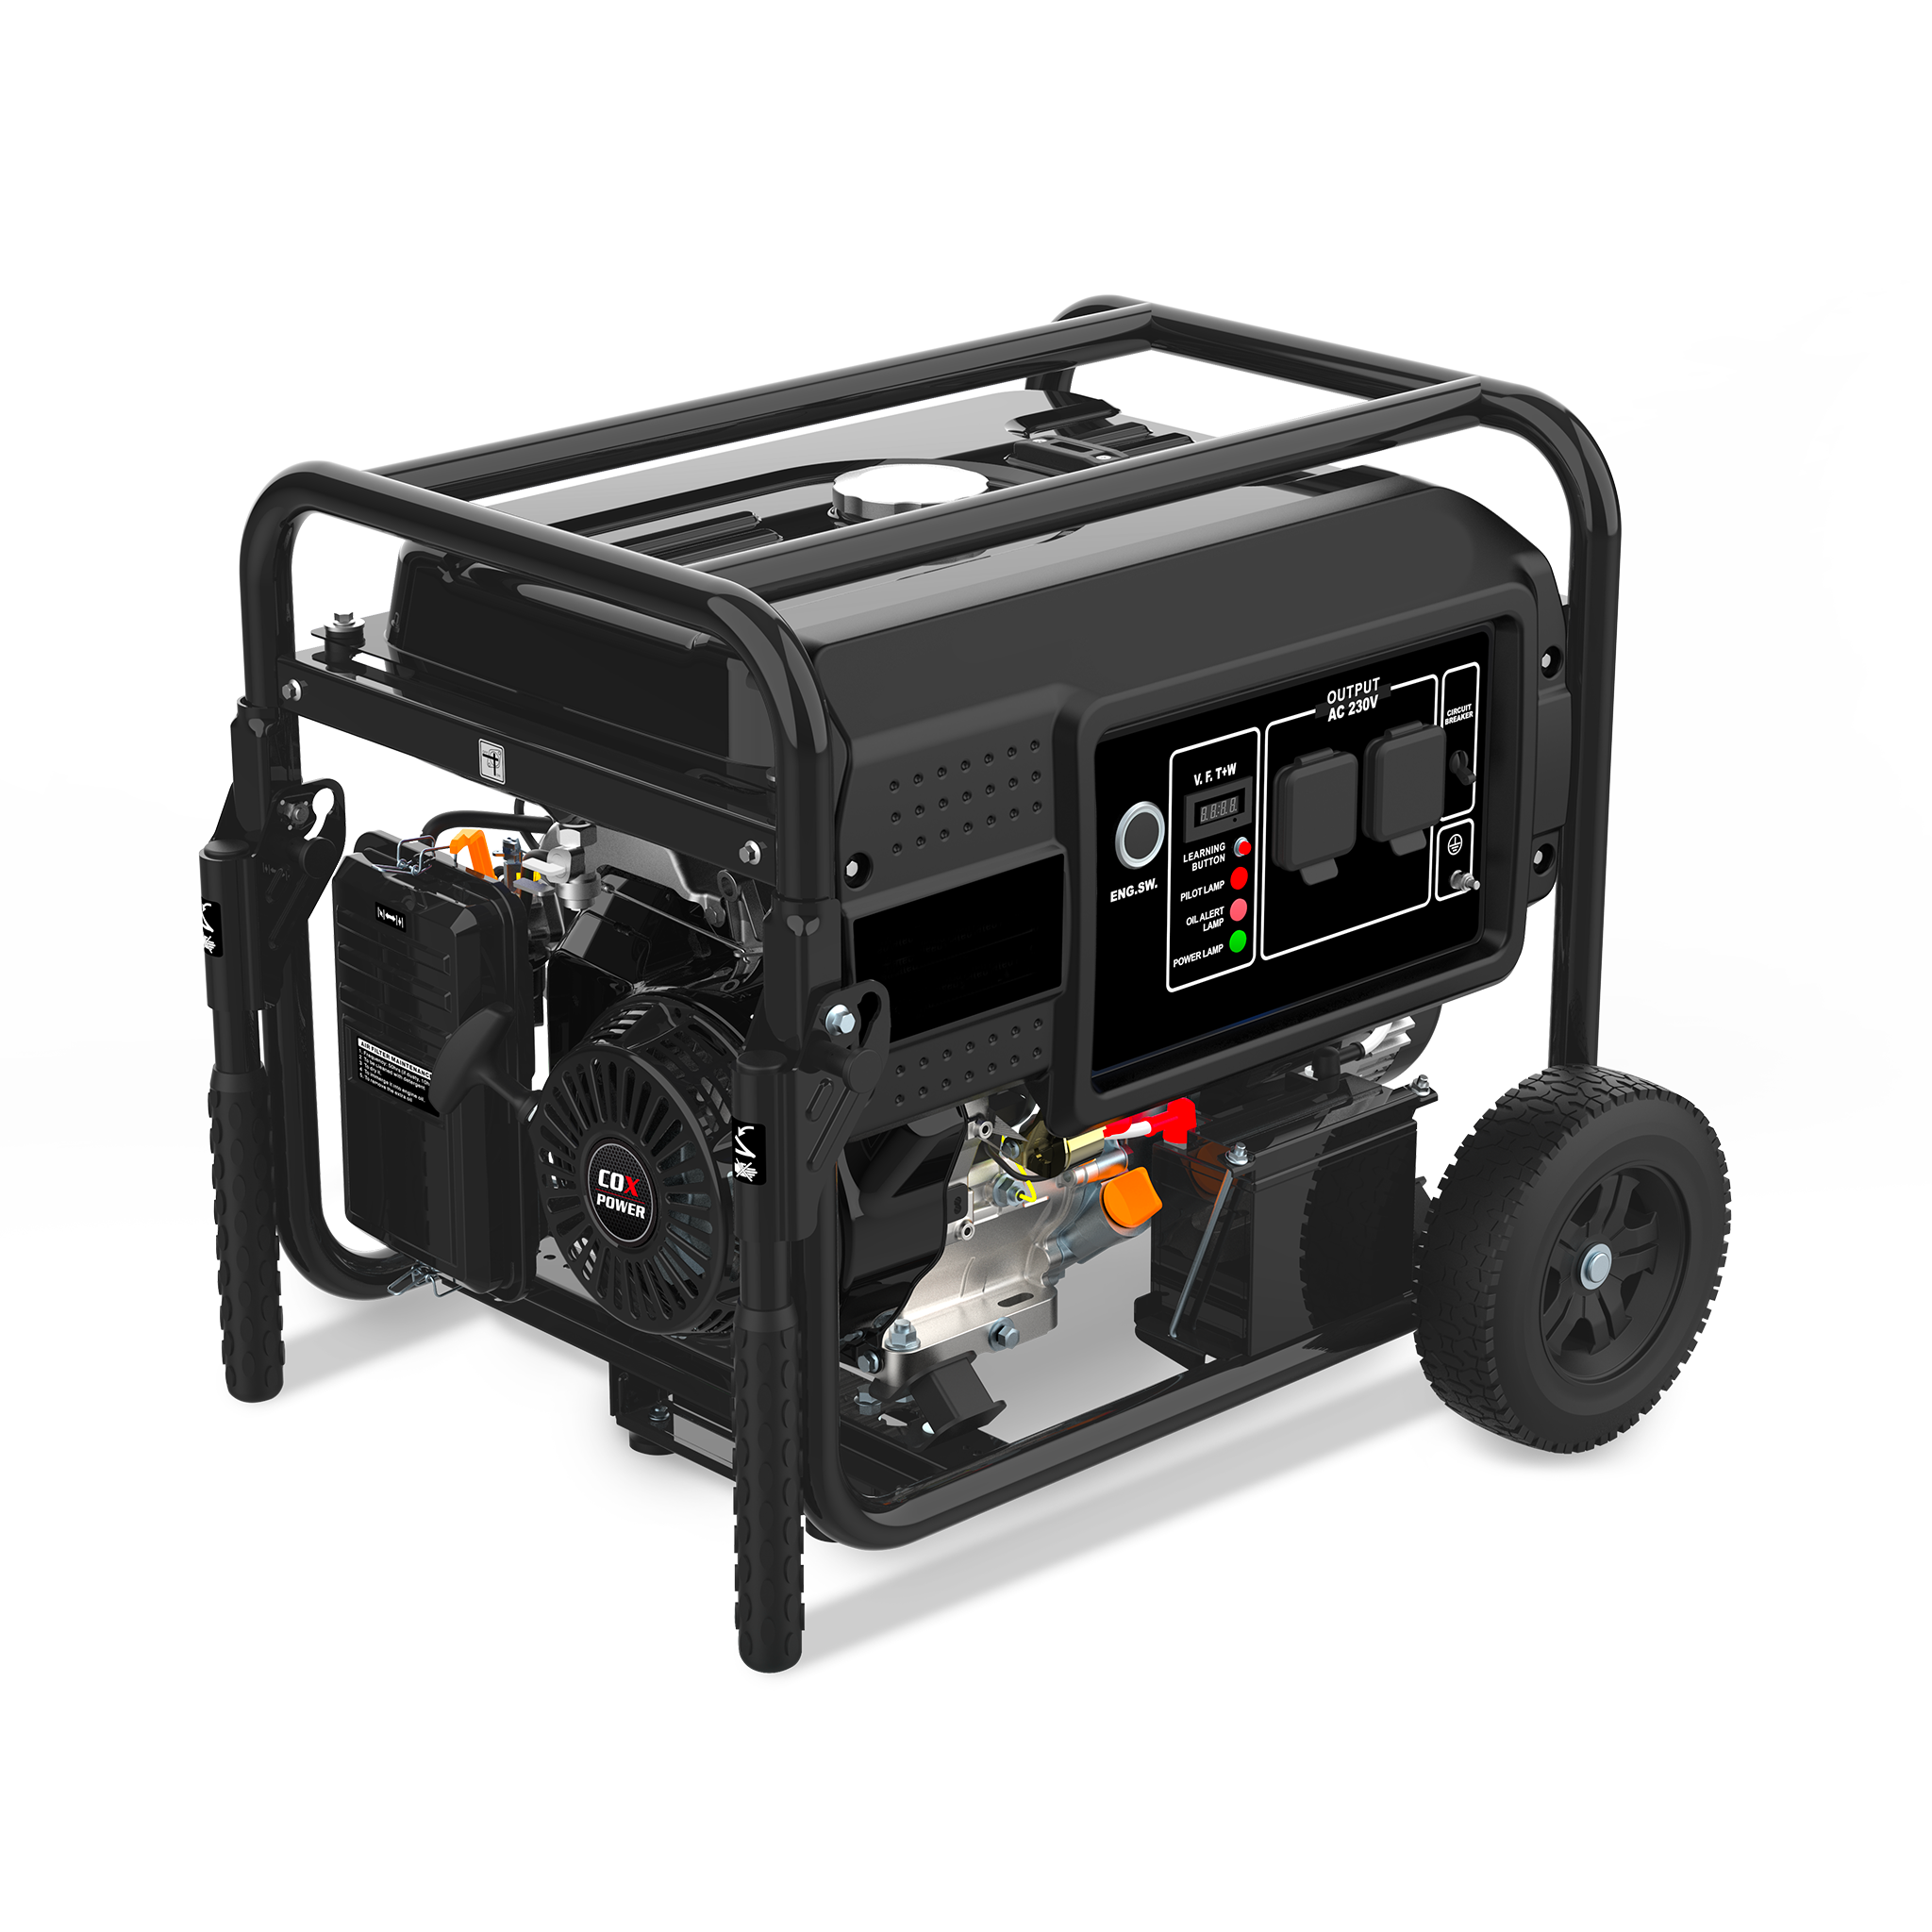 COX Power product image of a 3.3kw Electric Start Generator